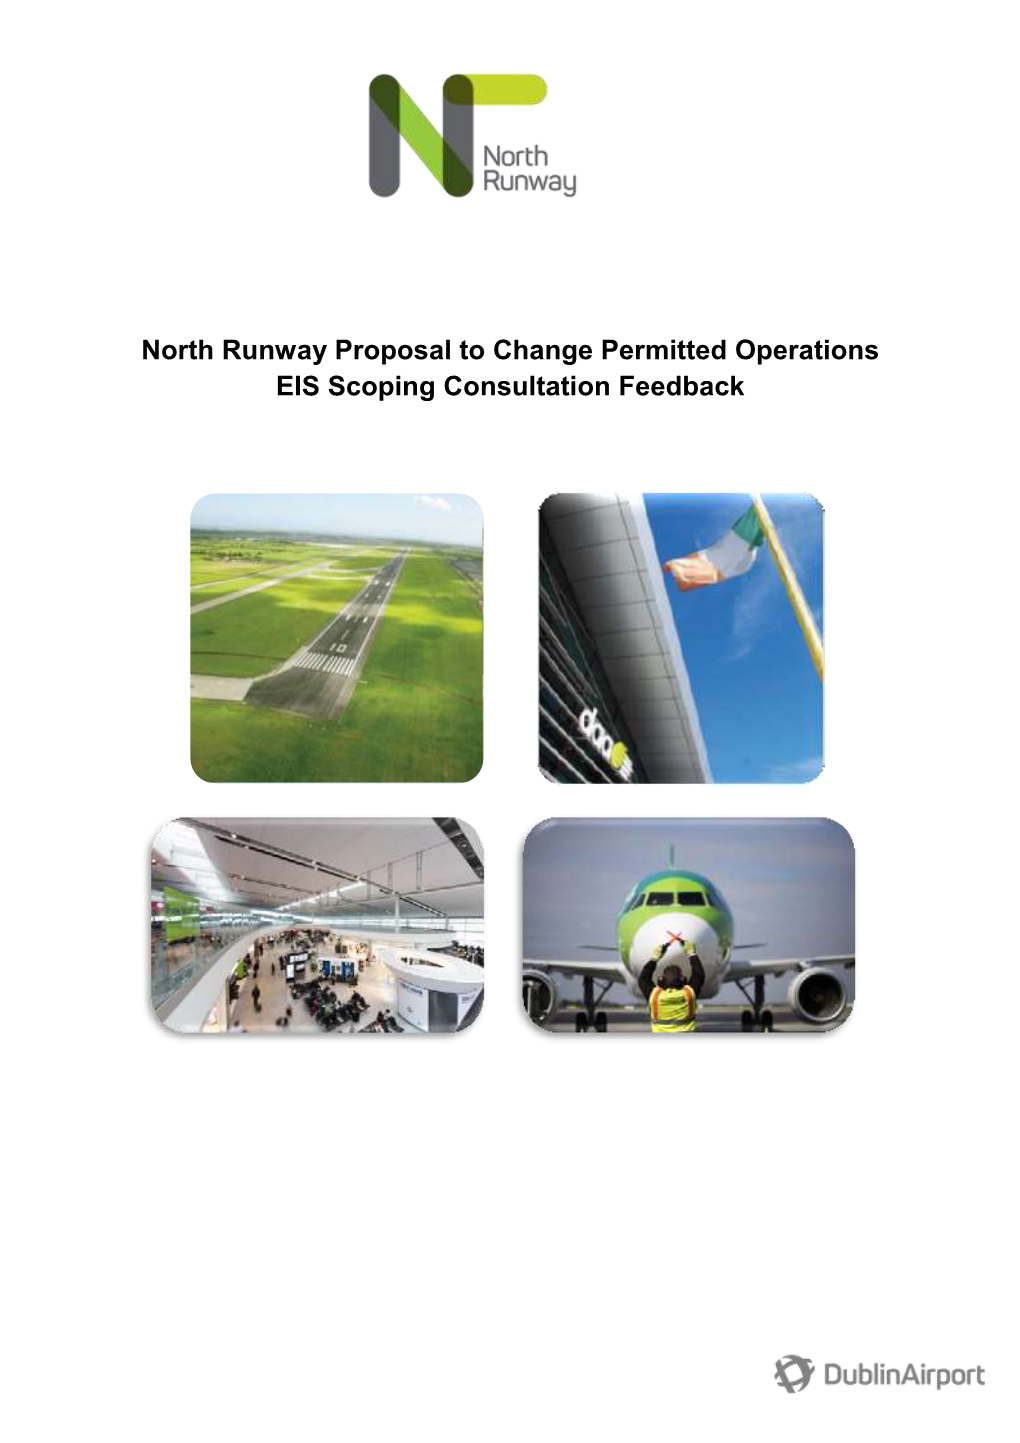 North Runway Proposal to Change Permitted Operations EIS Scoping Consultation Feedback